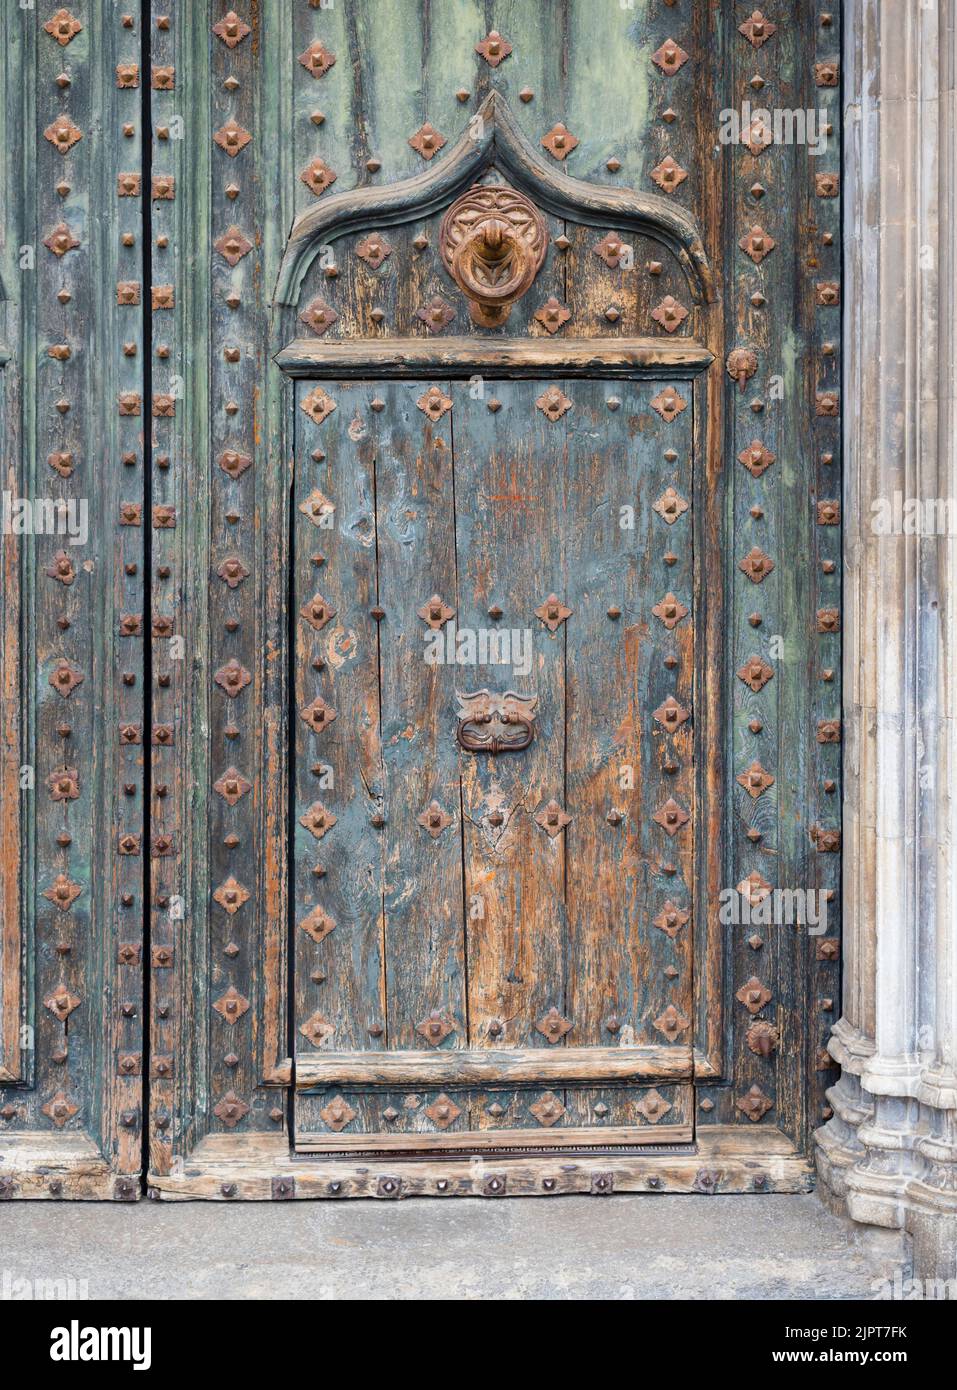 Girona, Spain - 26 June 2022: Ornamented entrance door to the the ancient cathedral of Girona (Catalunia/Spain) Stock Photo